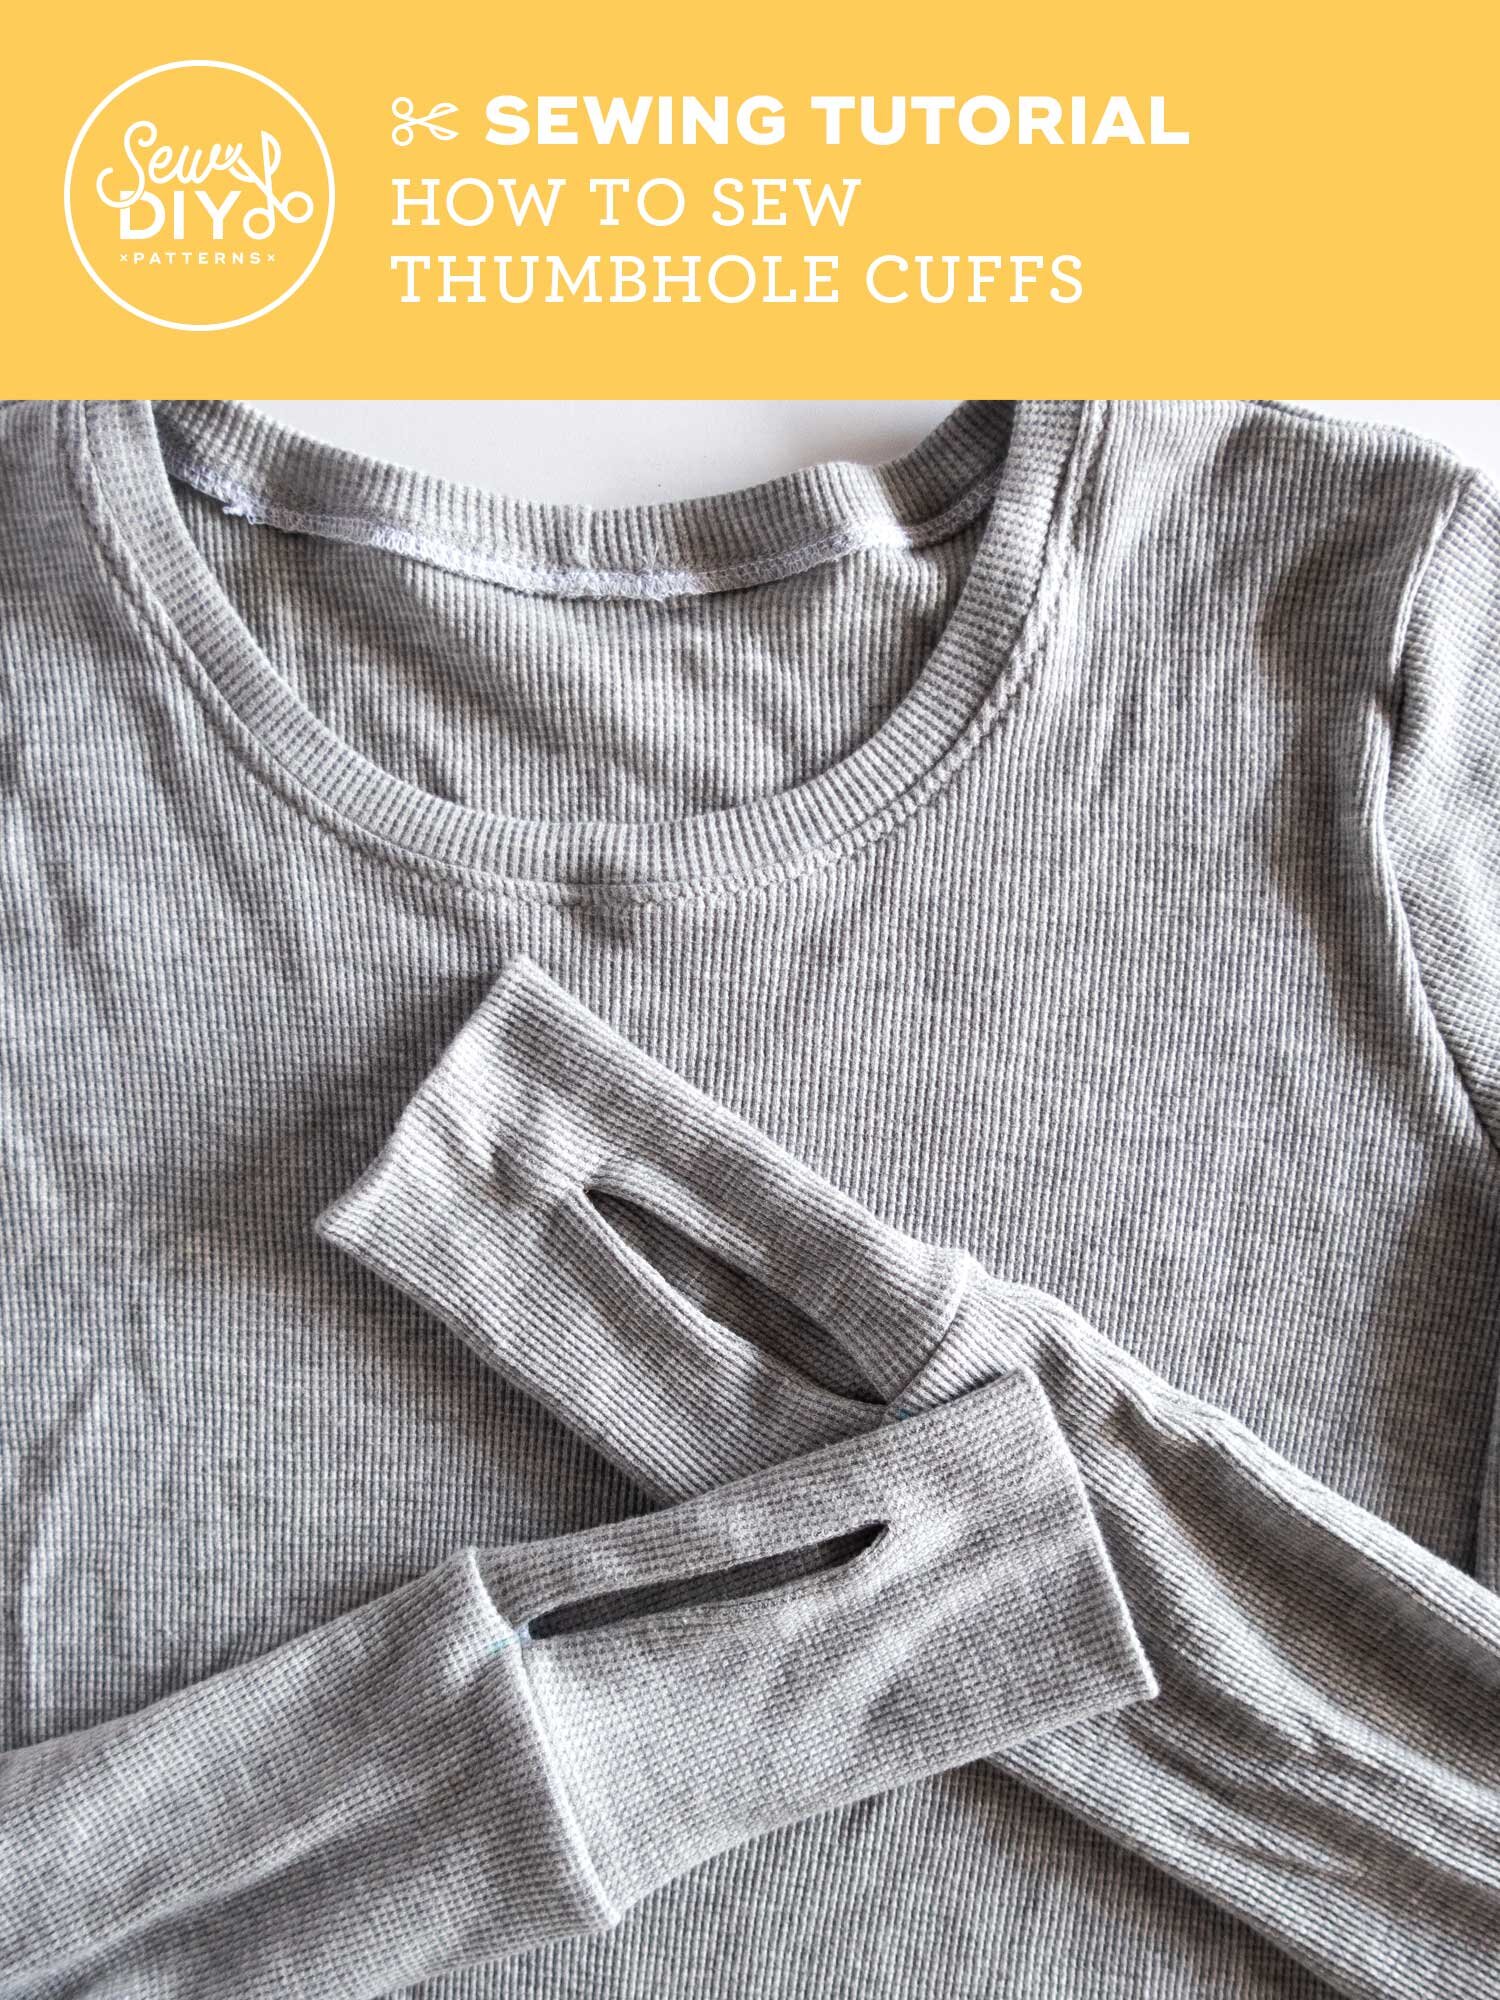 How to sew thumbhole cuffs - VIDEO TUTORIAL — Sew DIY